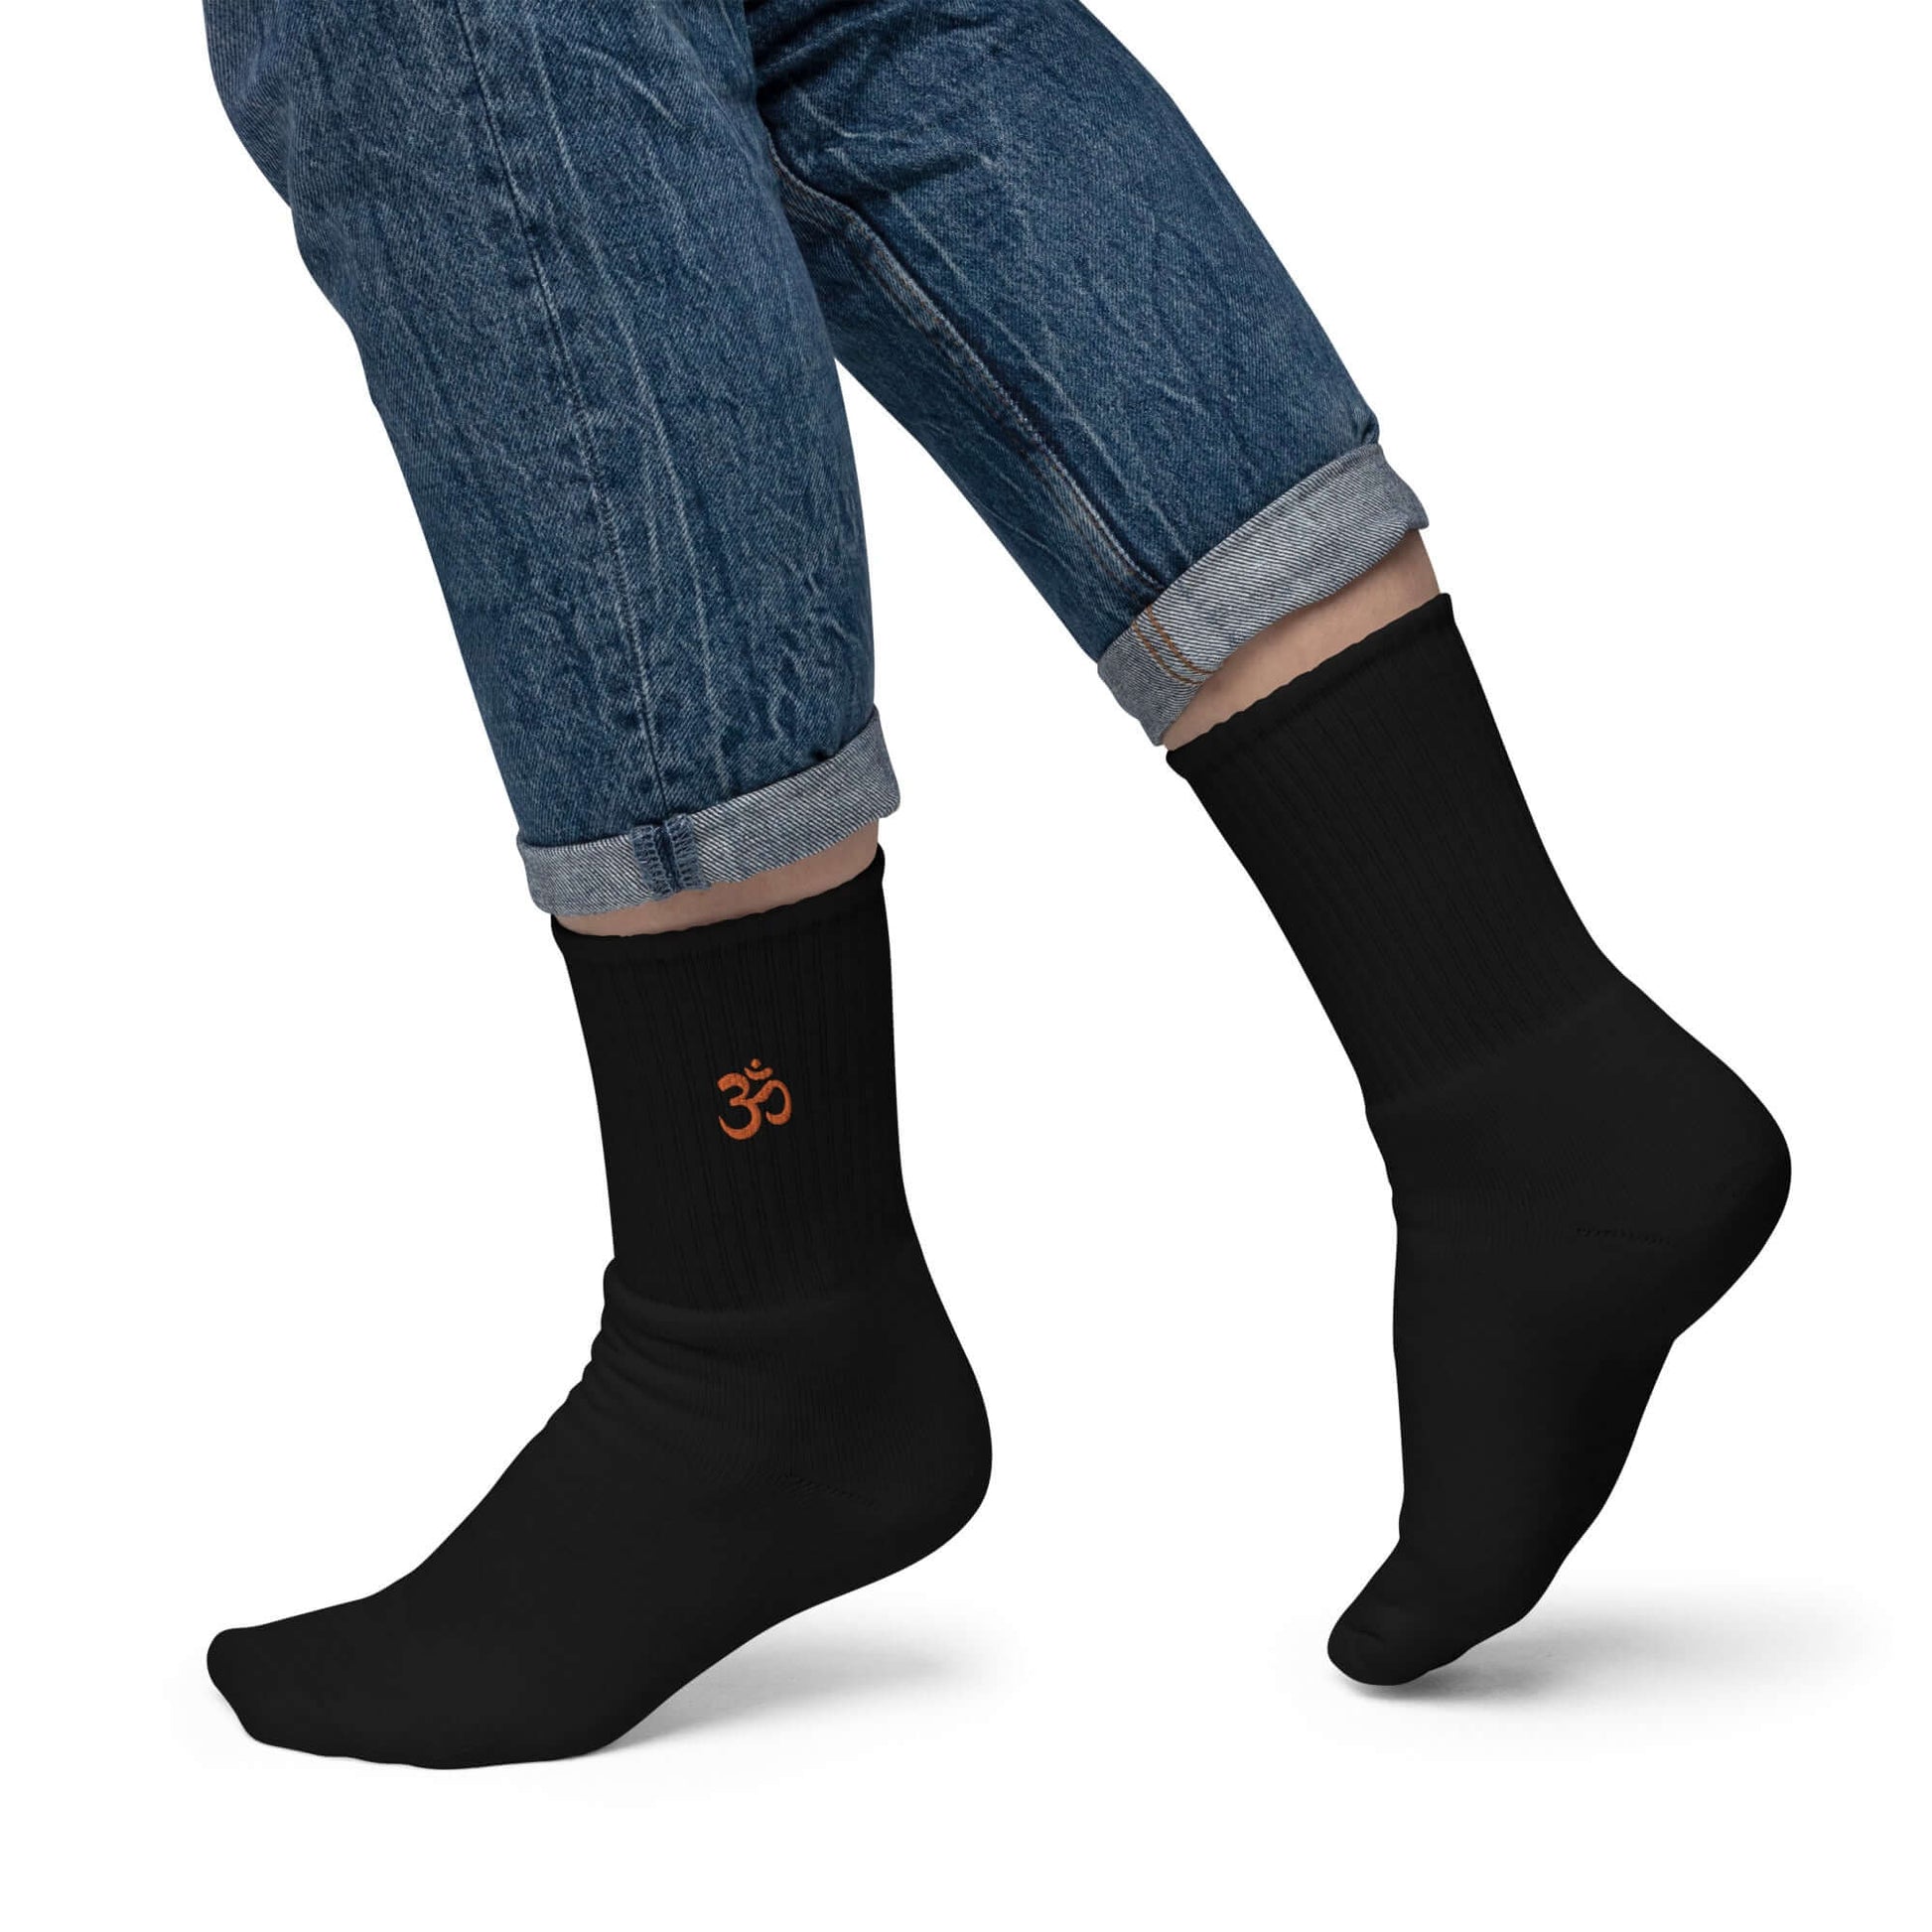 OM Embroidered Socks Black Practice Pieces